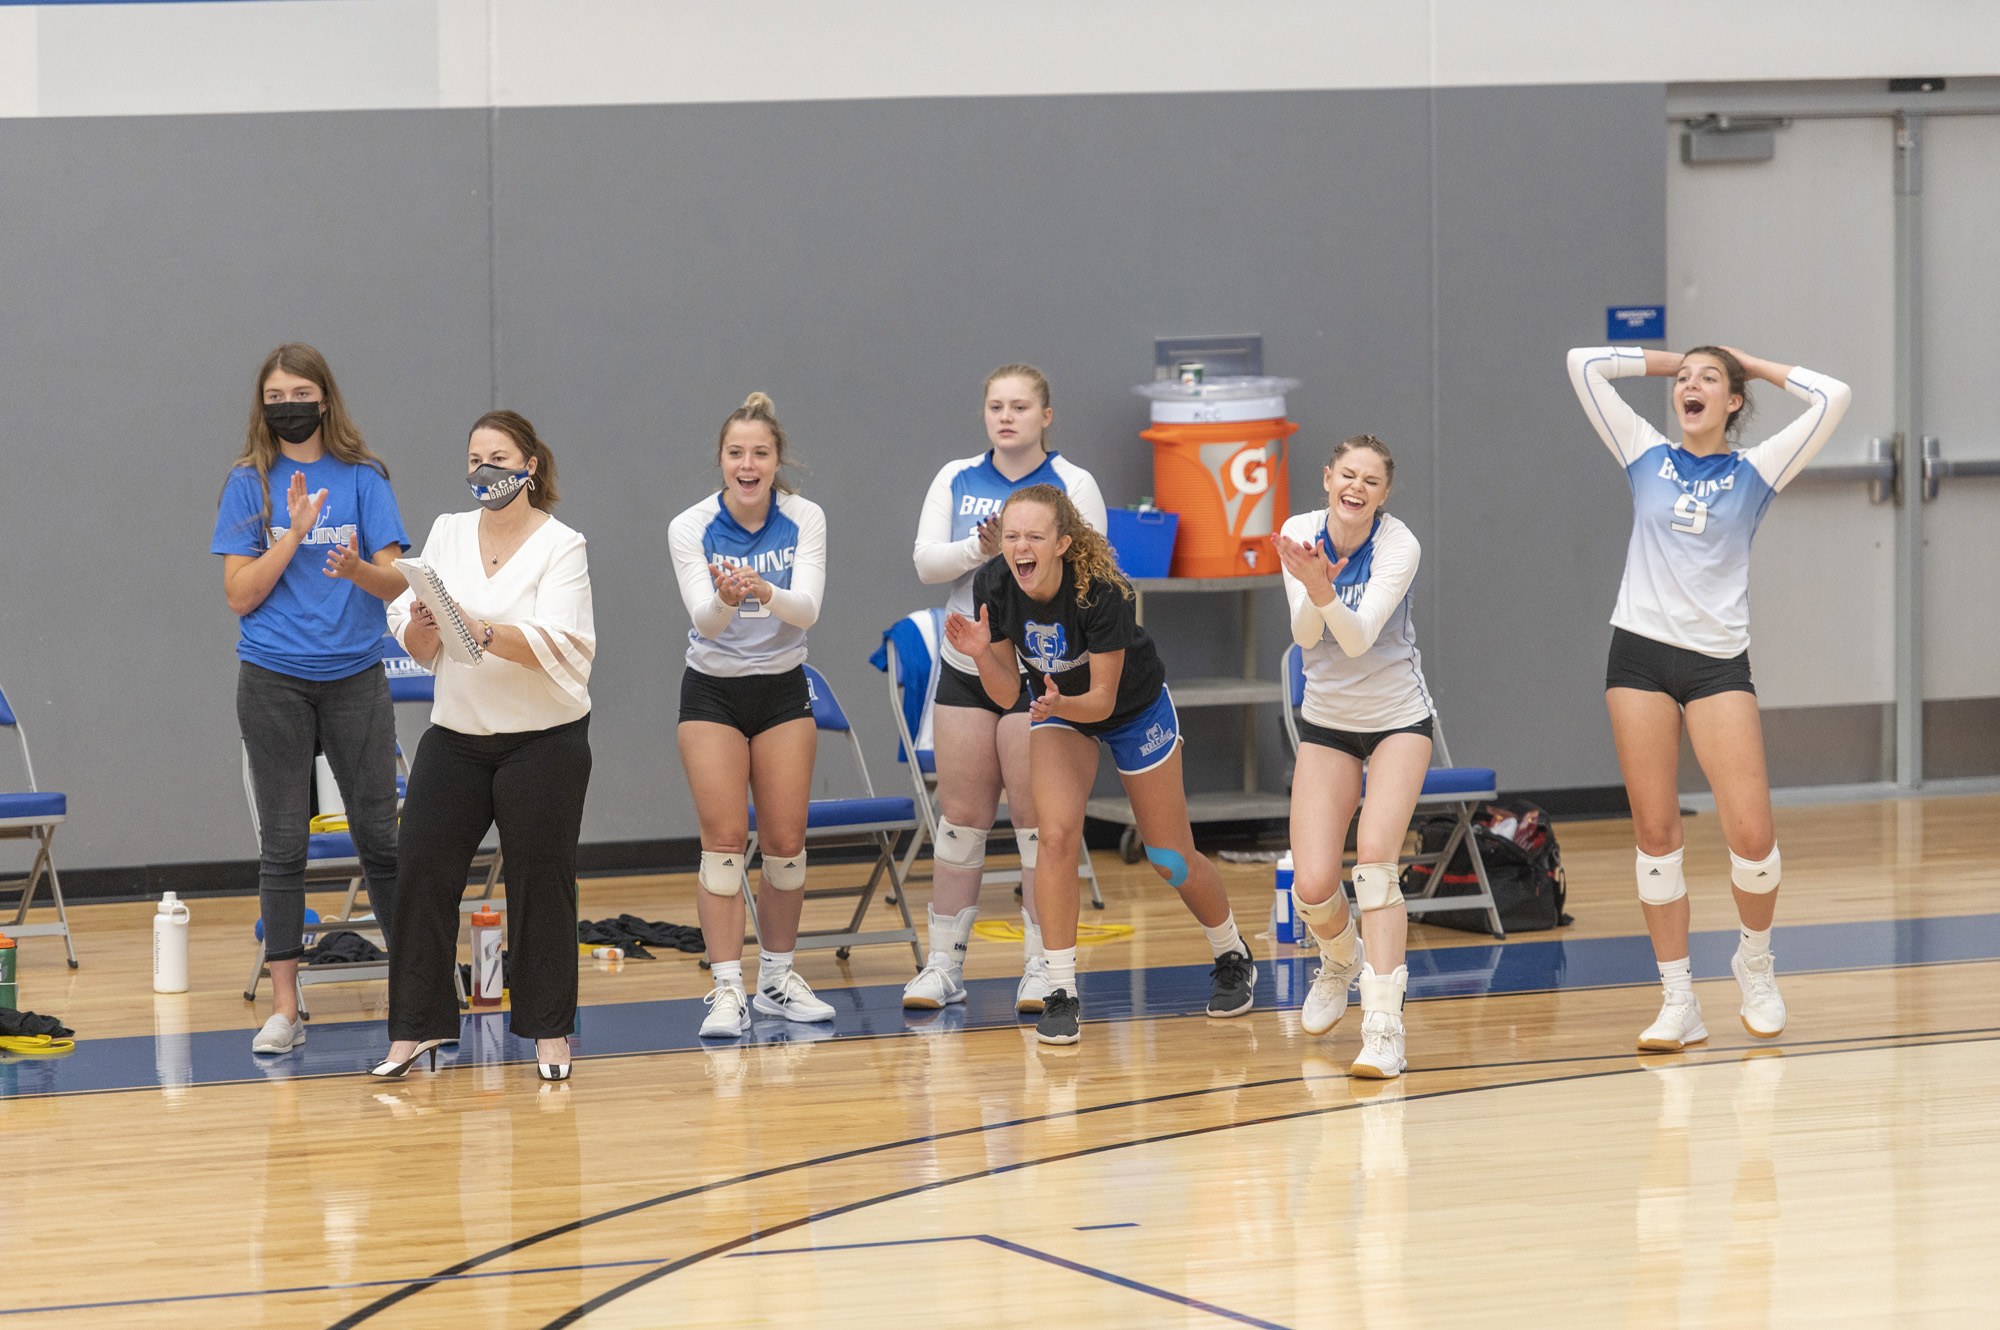 The women's volleyball team celebrates on the sideline after scoring a point.